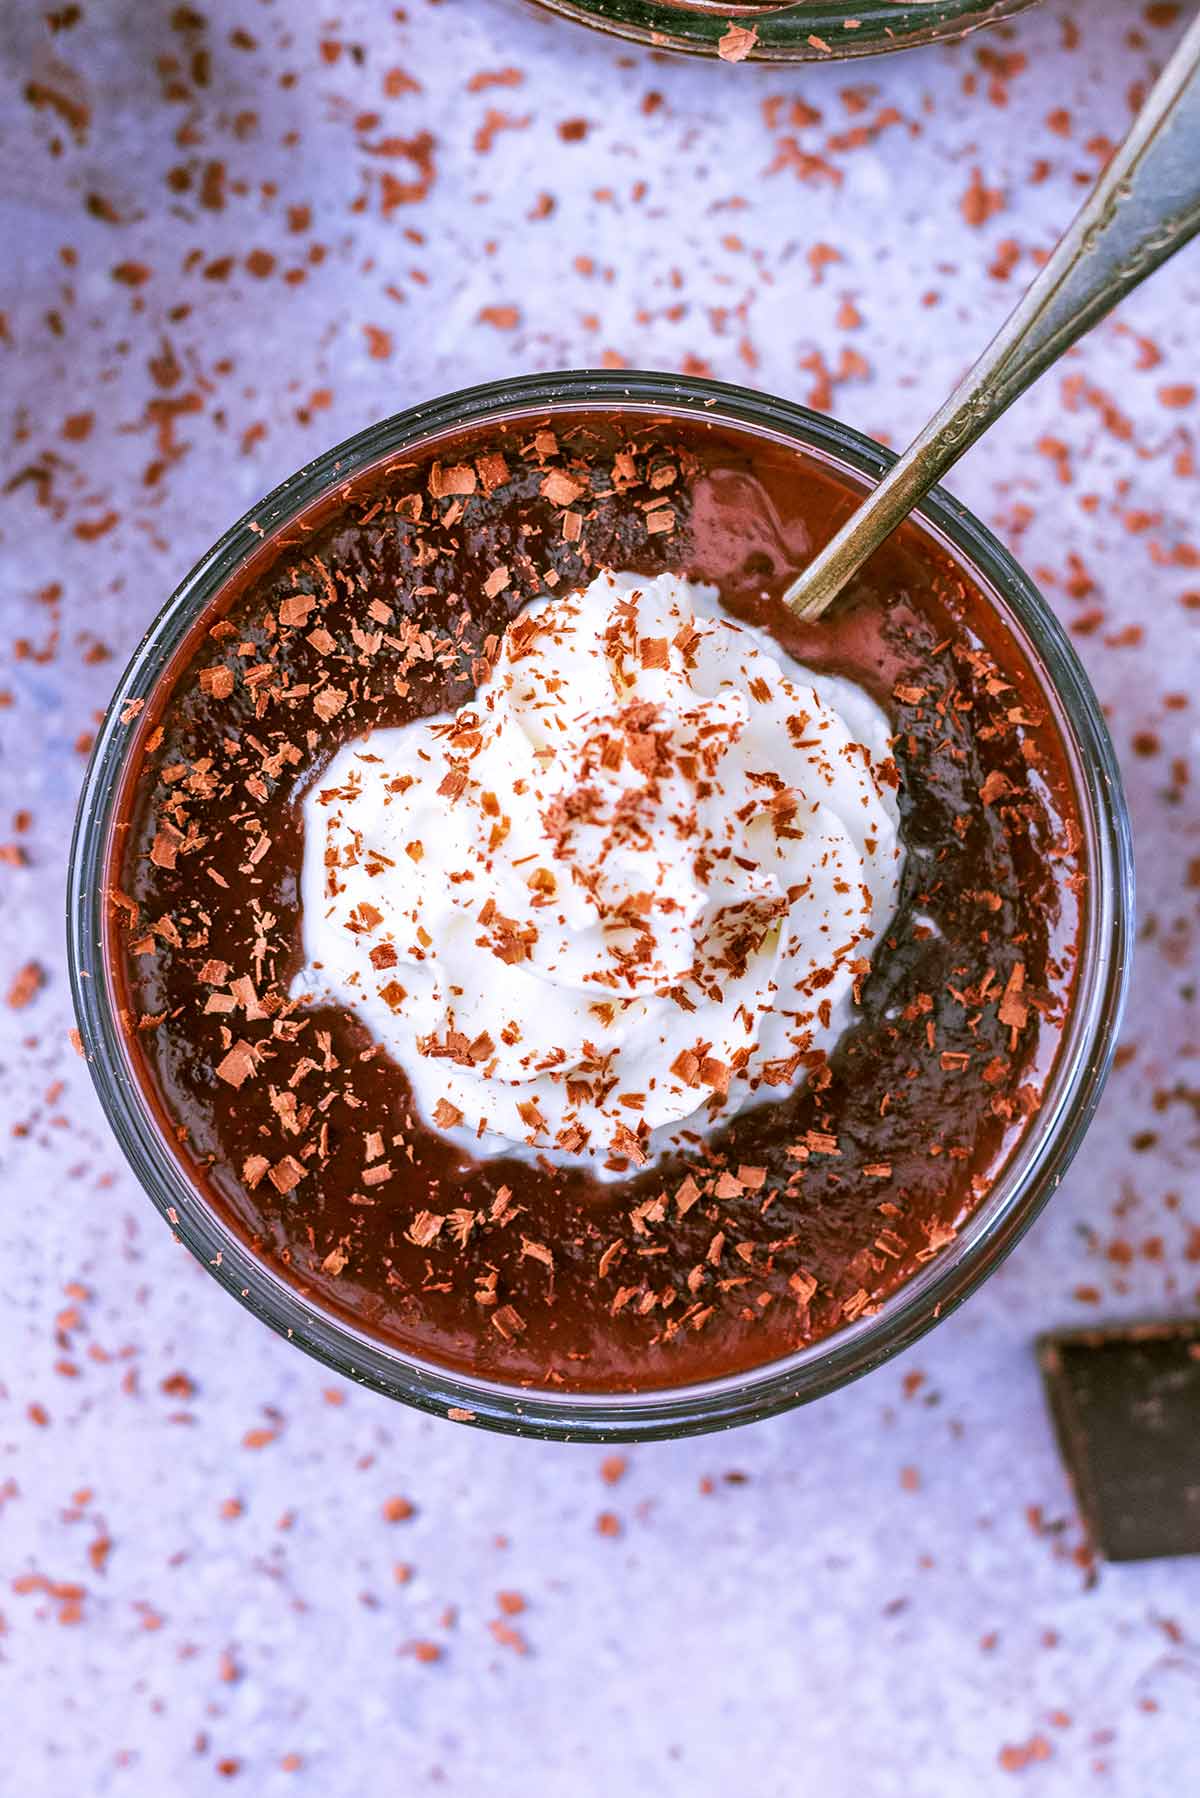 A pot of chocolate dessert with a dollop of whipped cream on top.